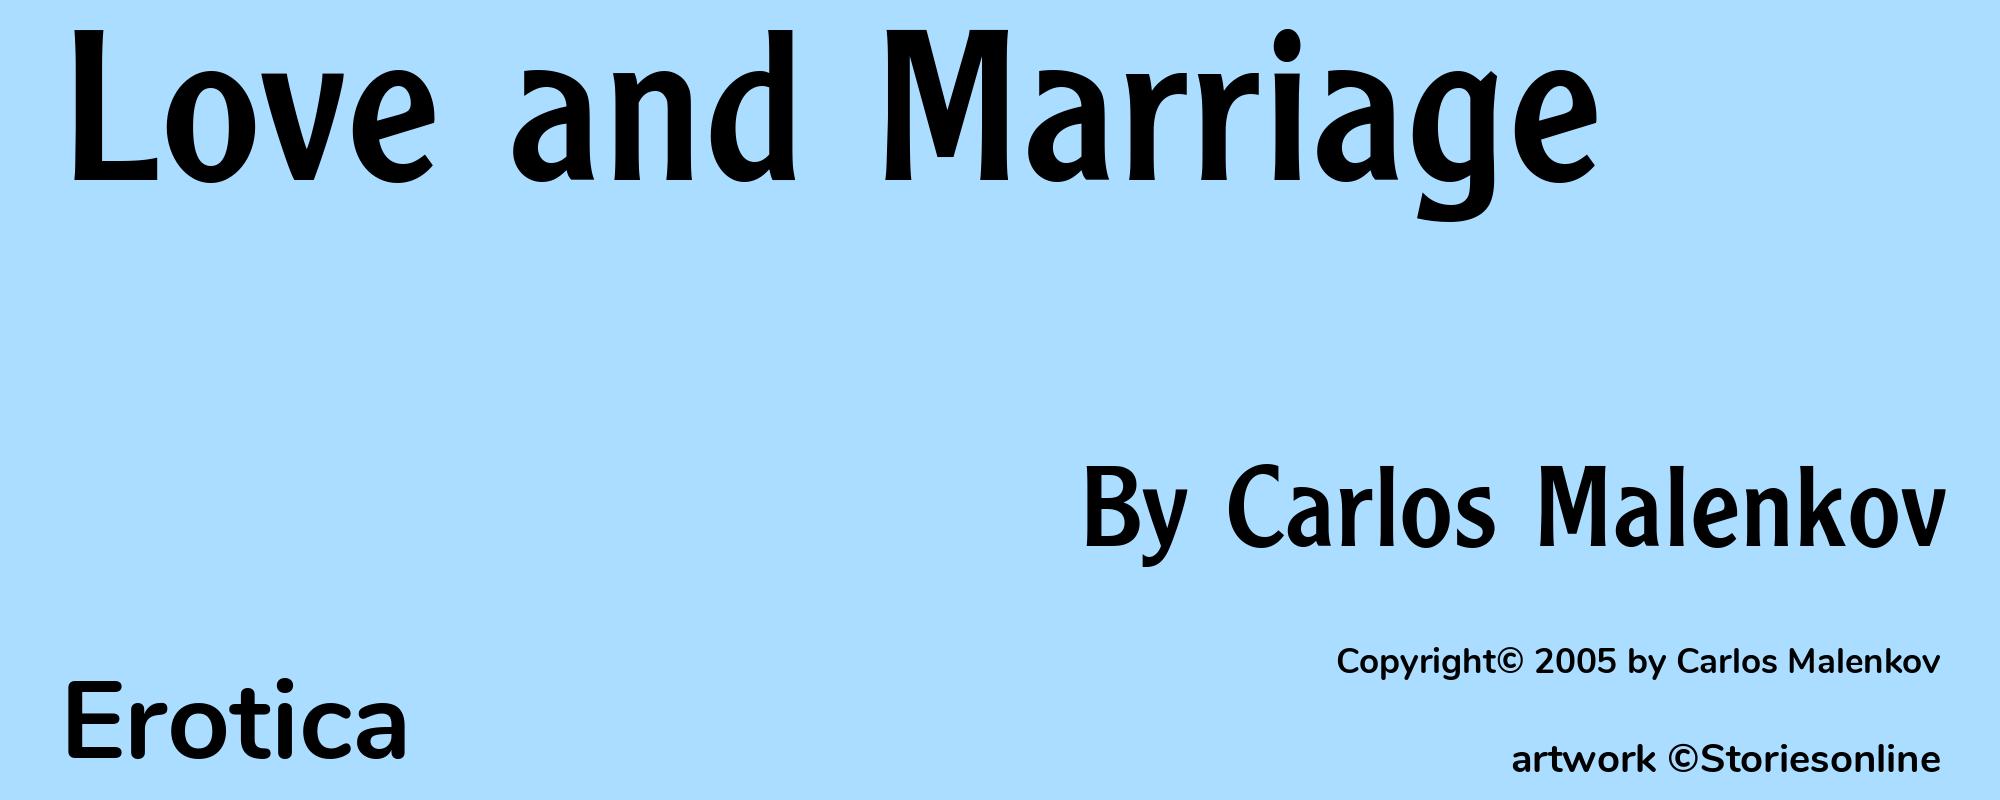 Love and Marriage - Cover